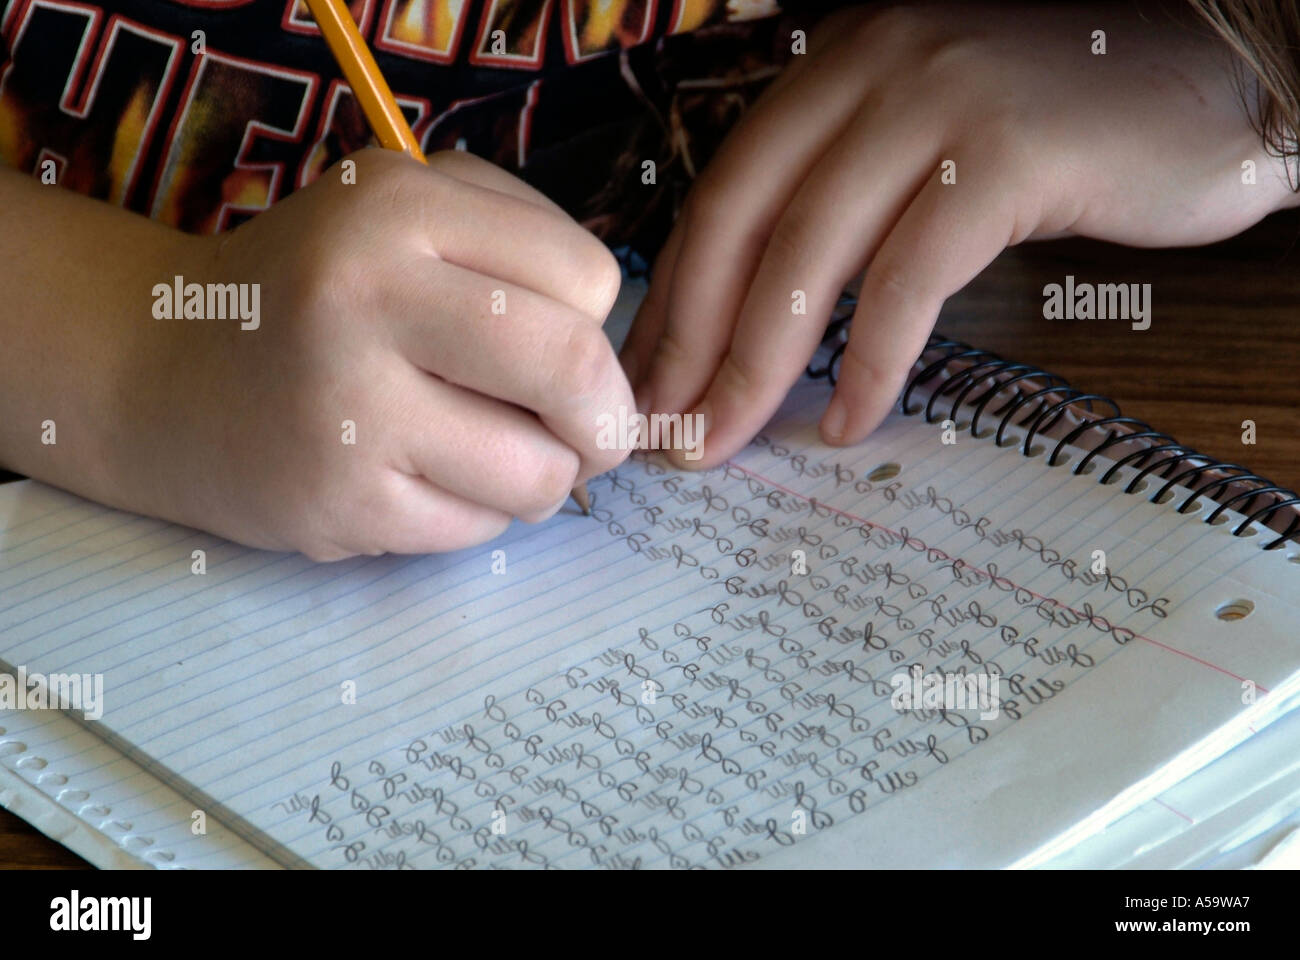 High school female practices handwriting in English class Stock Photo